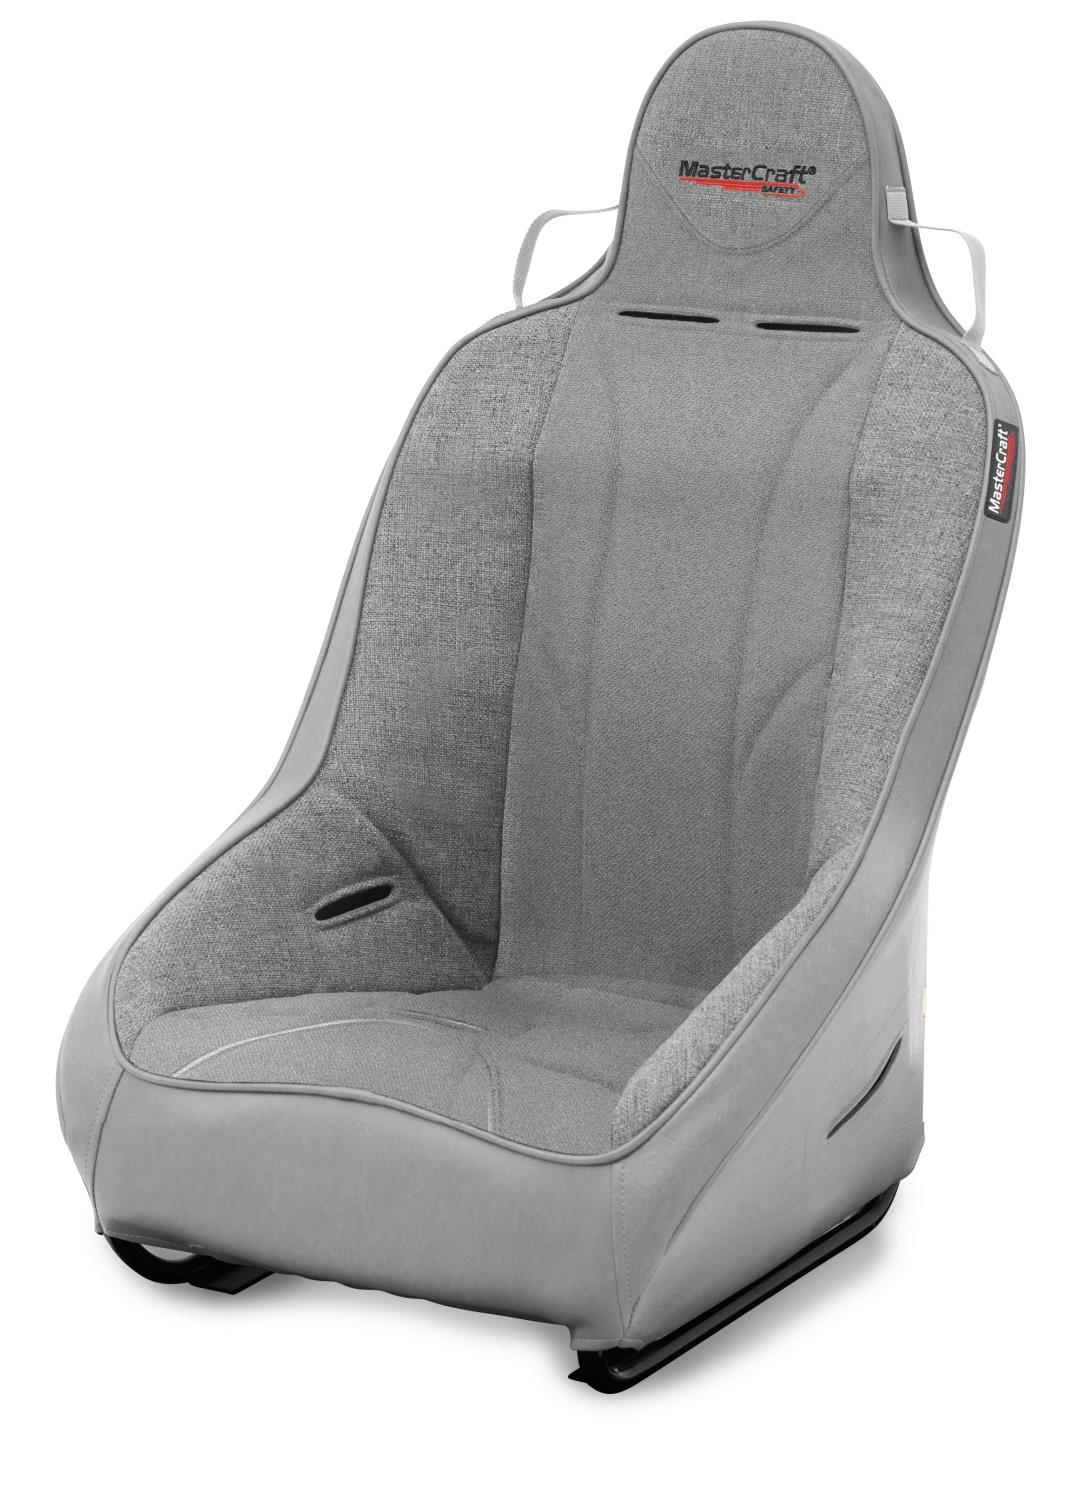 560119 1 in. WIDER PROSeat w/Fixed Headrest, Smoke Gray with Heather Gray Fabric Center and Side Panels